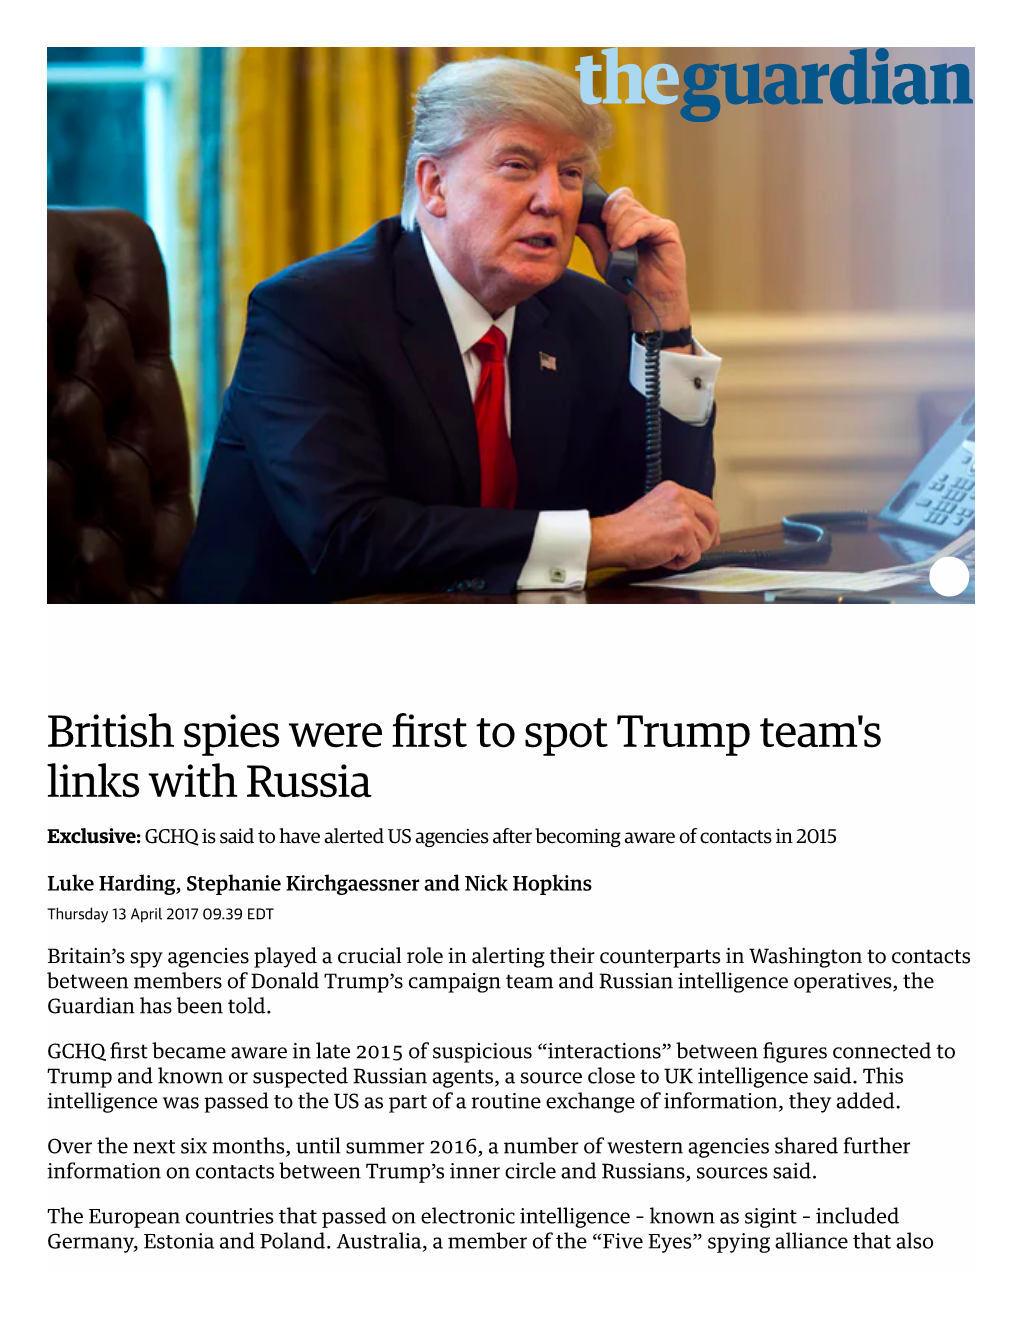 British Spies Were First to Spot Trump Team's Links with Russia